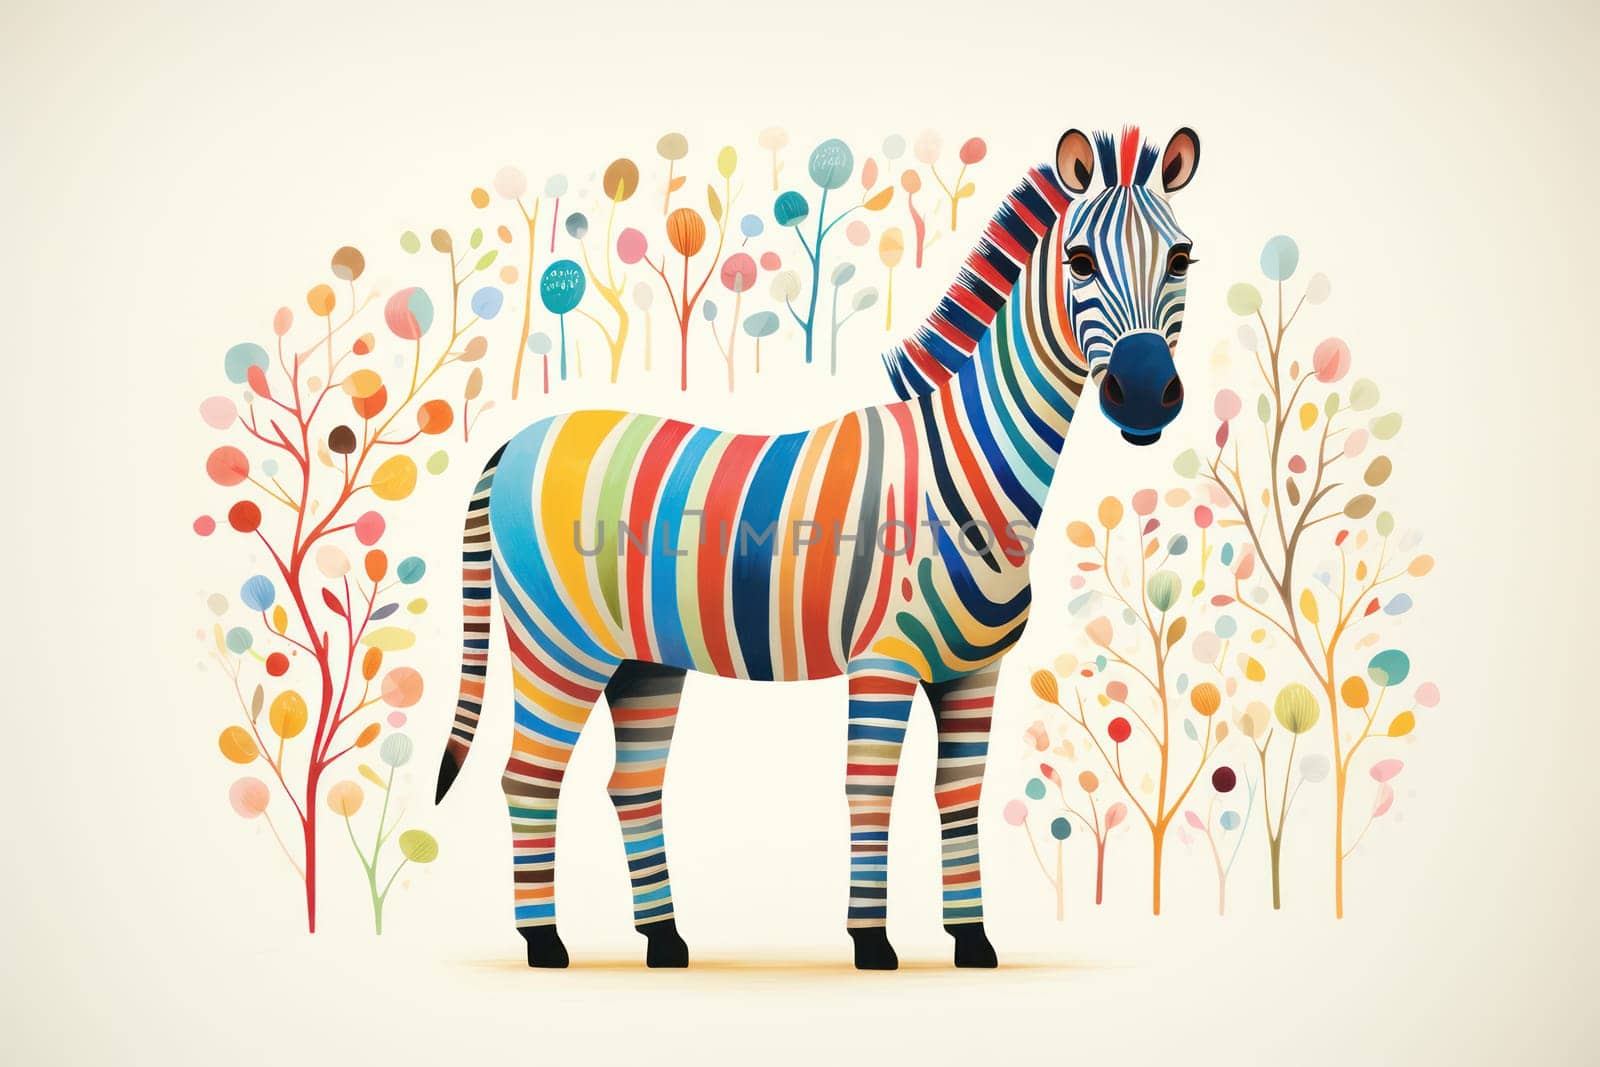 Striped Harmony: A Colorful Zebra Silhouette in African Savanna by Vichizh